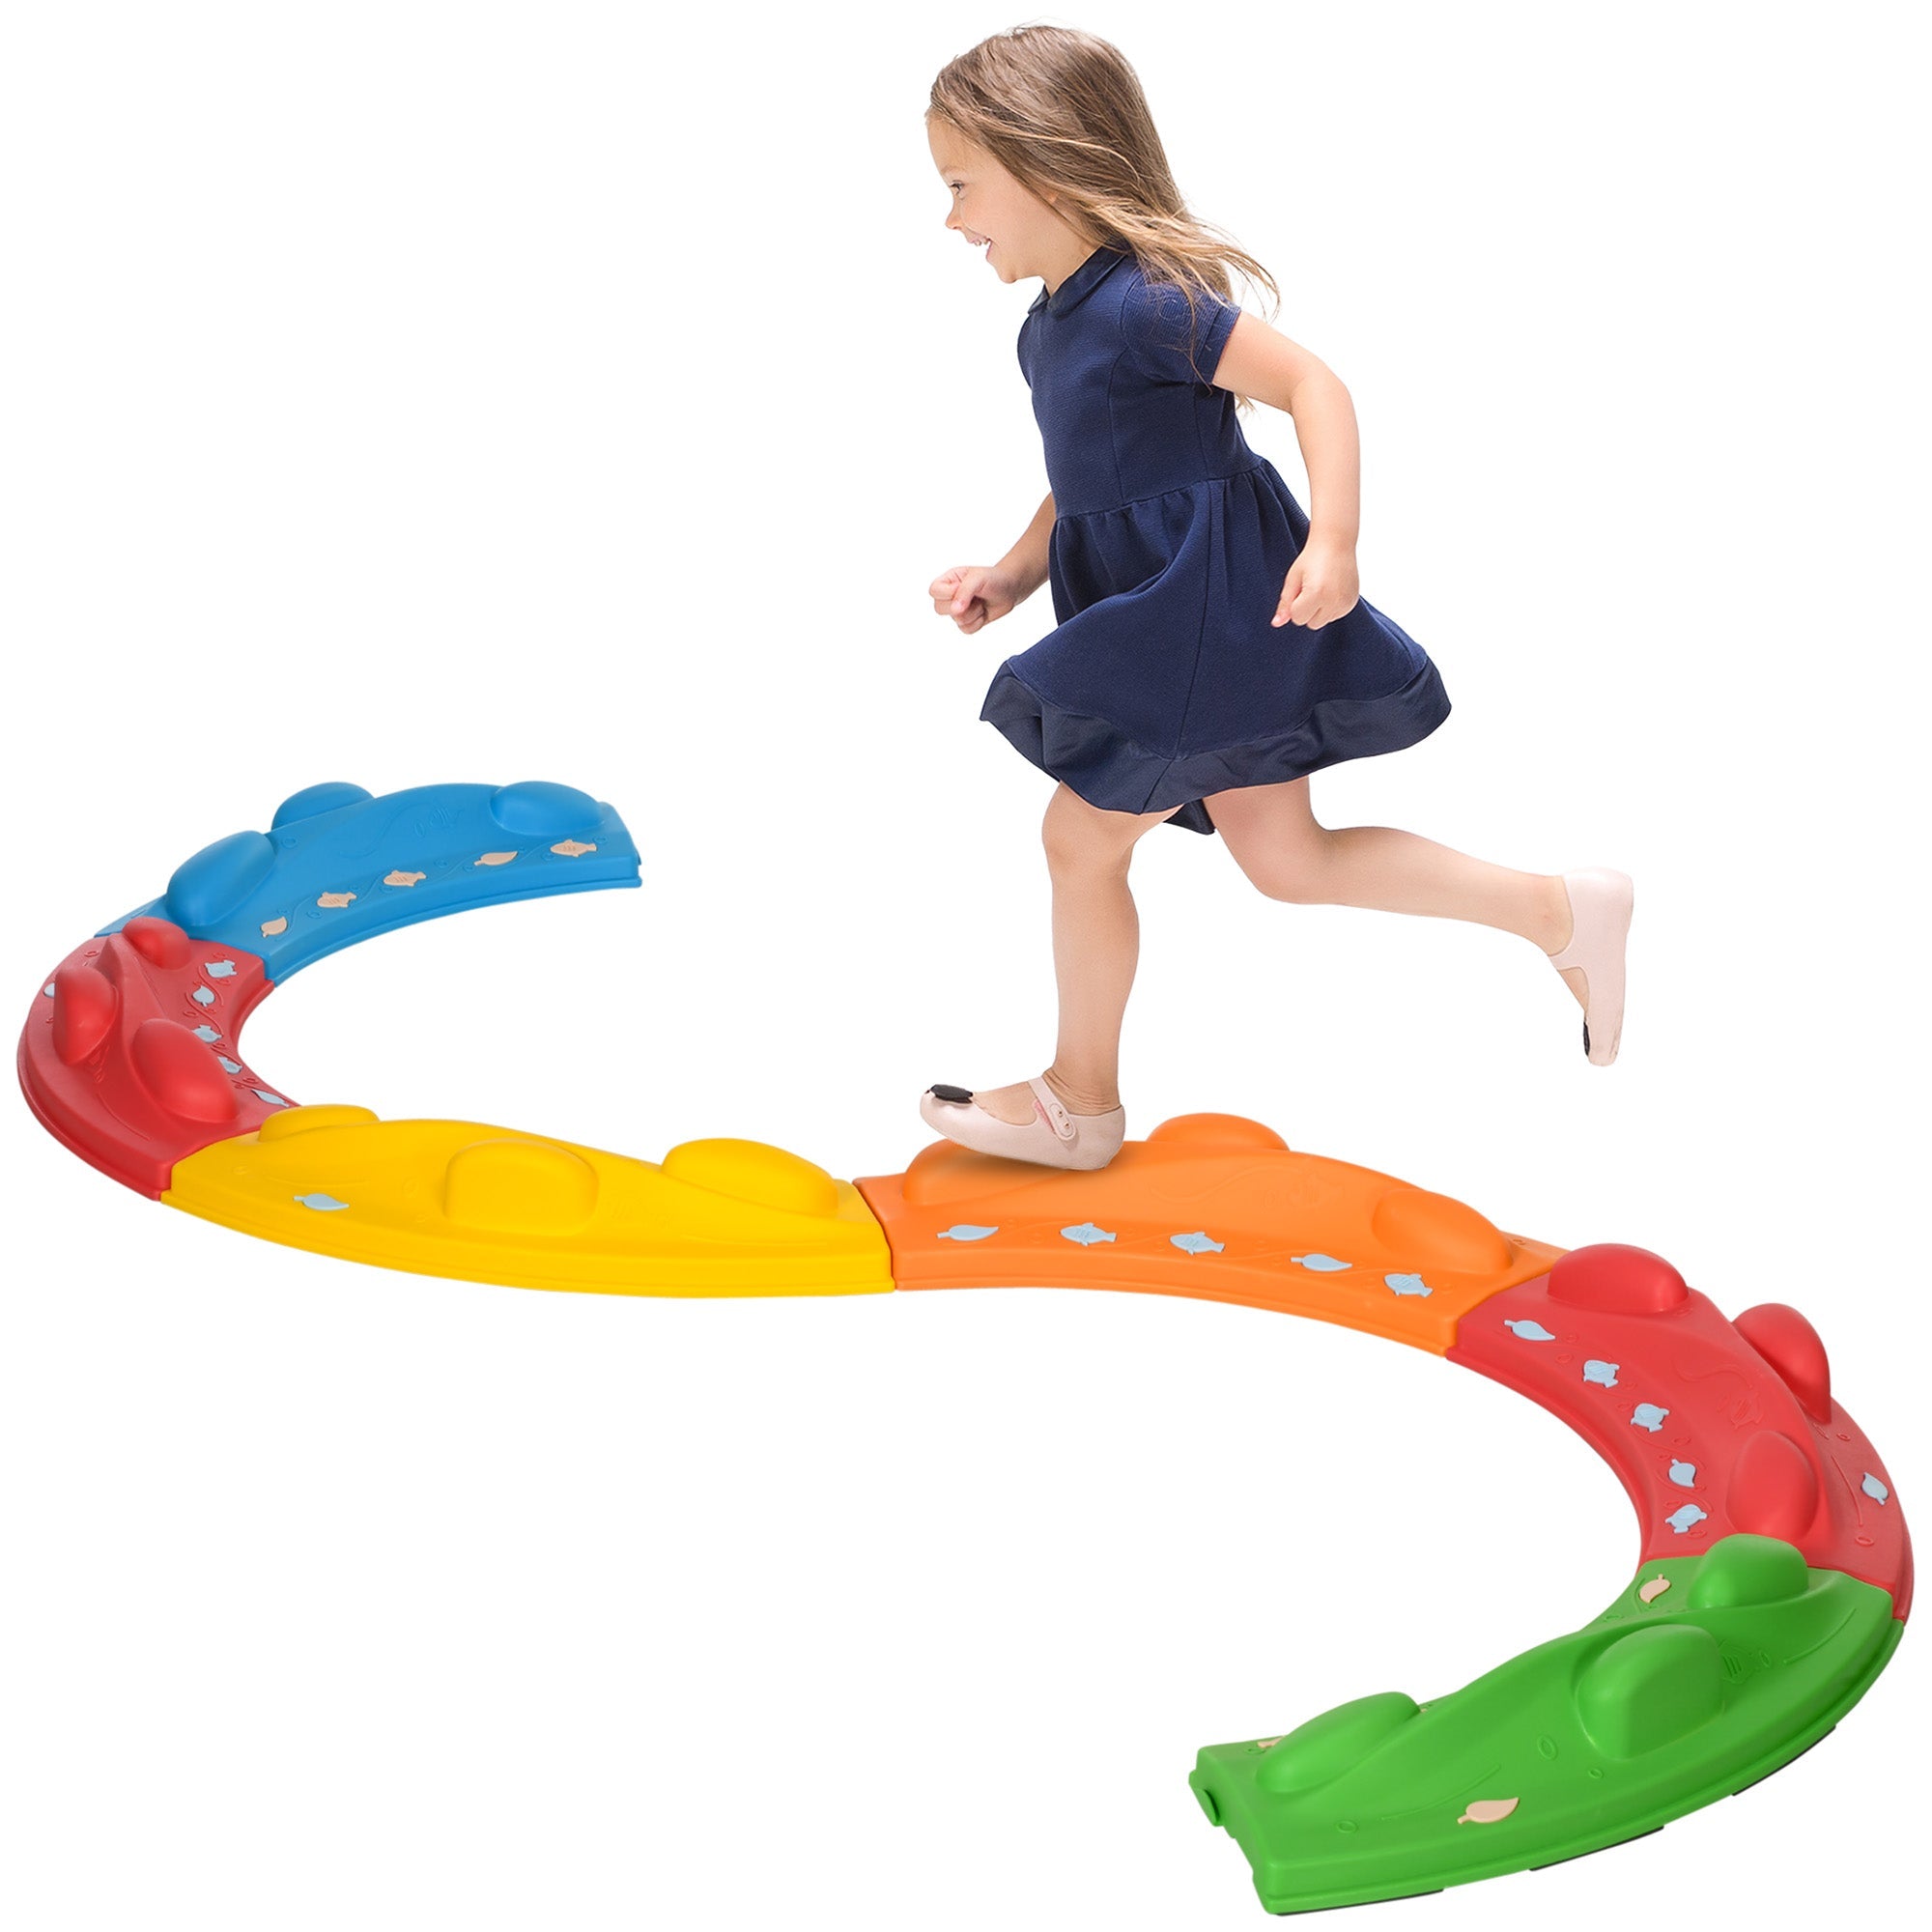 Kids Balance Beam, Kids 6 Pieces Stepping Stones Obstacle Course, for Ages 3-8 Years - Multicoloured-0